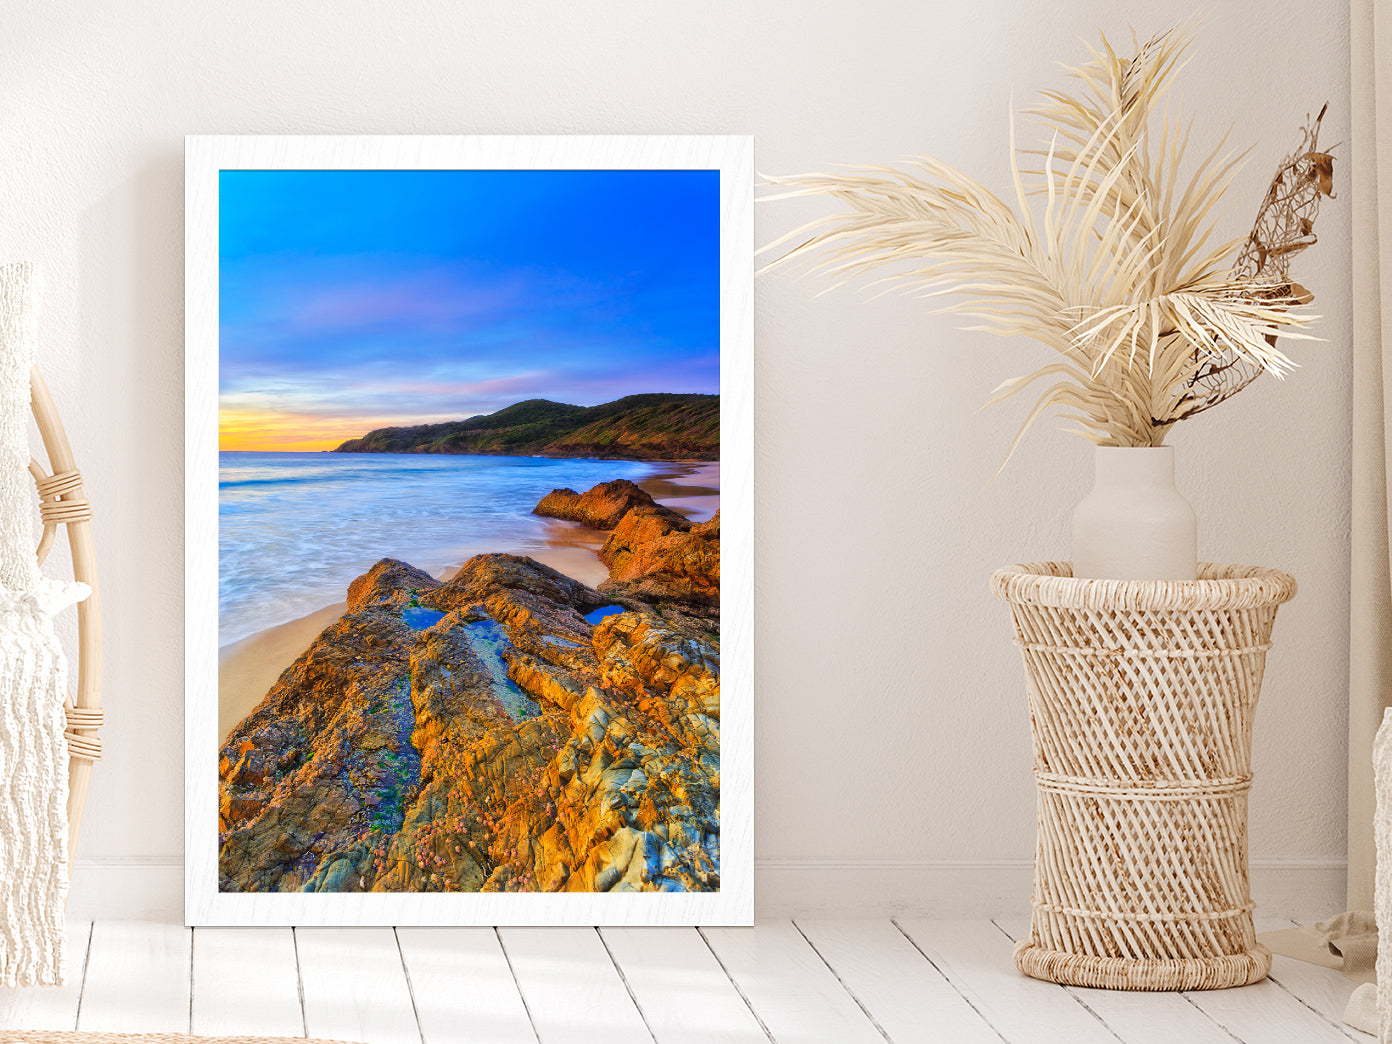 Seascape Sunrise At Burgess Beach Glass Framed Wall Art, Ready to Hang Quality Print Without White Border White